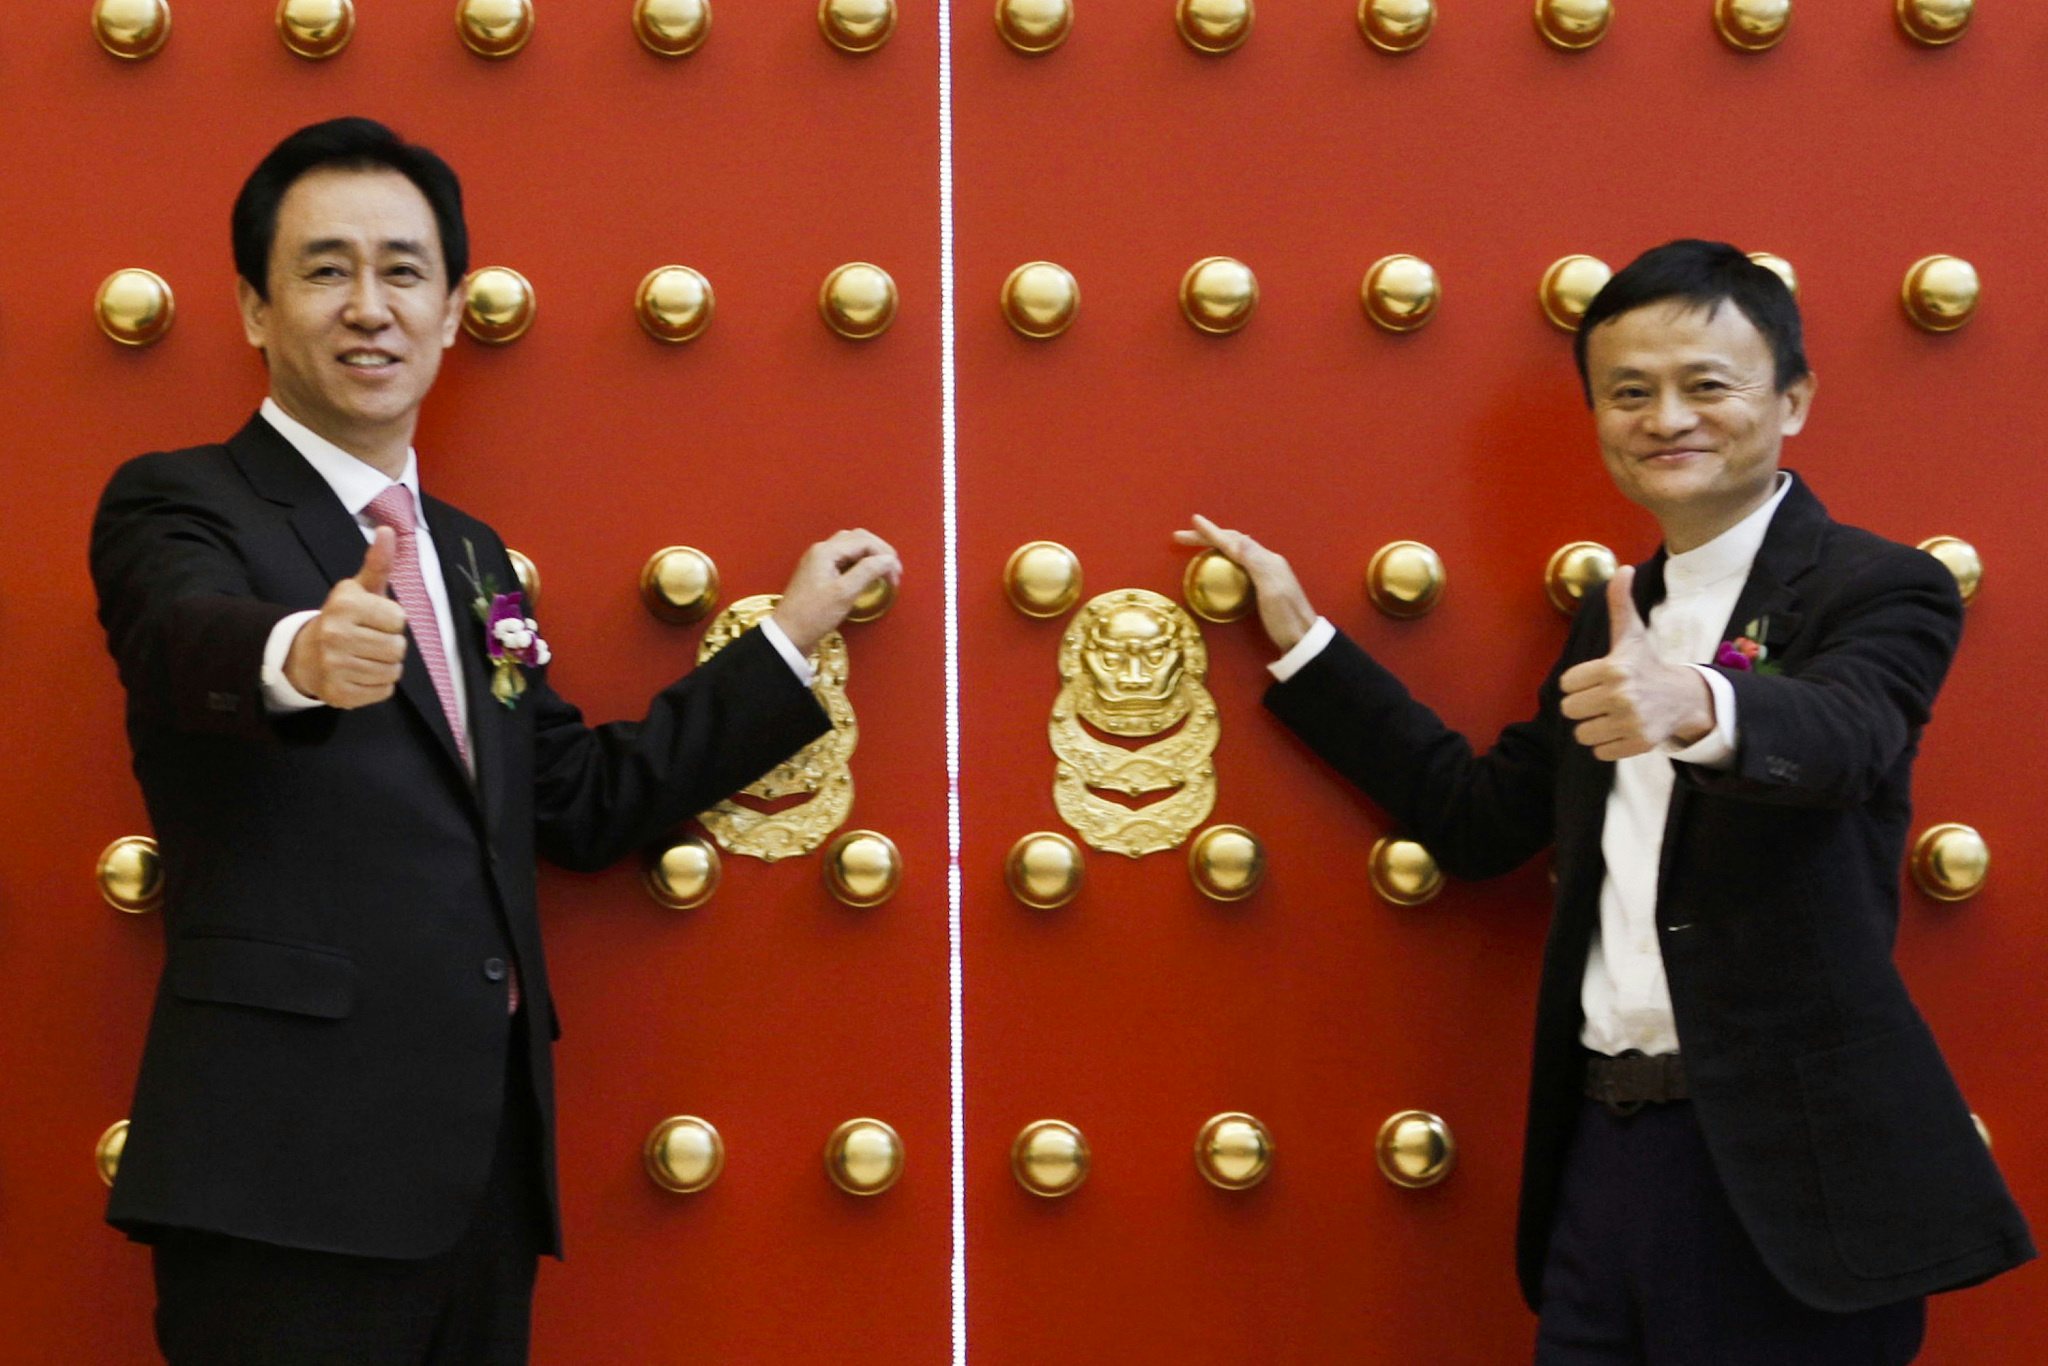 Alibaba's Jack Ma and Evergrande's Xu Jiayin are two of the most well-known Chinese billionaires around the world. Photo: VCG